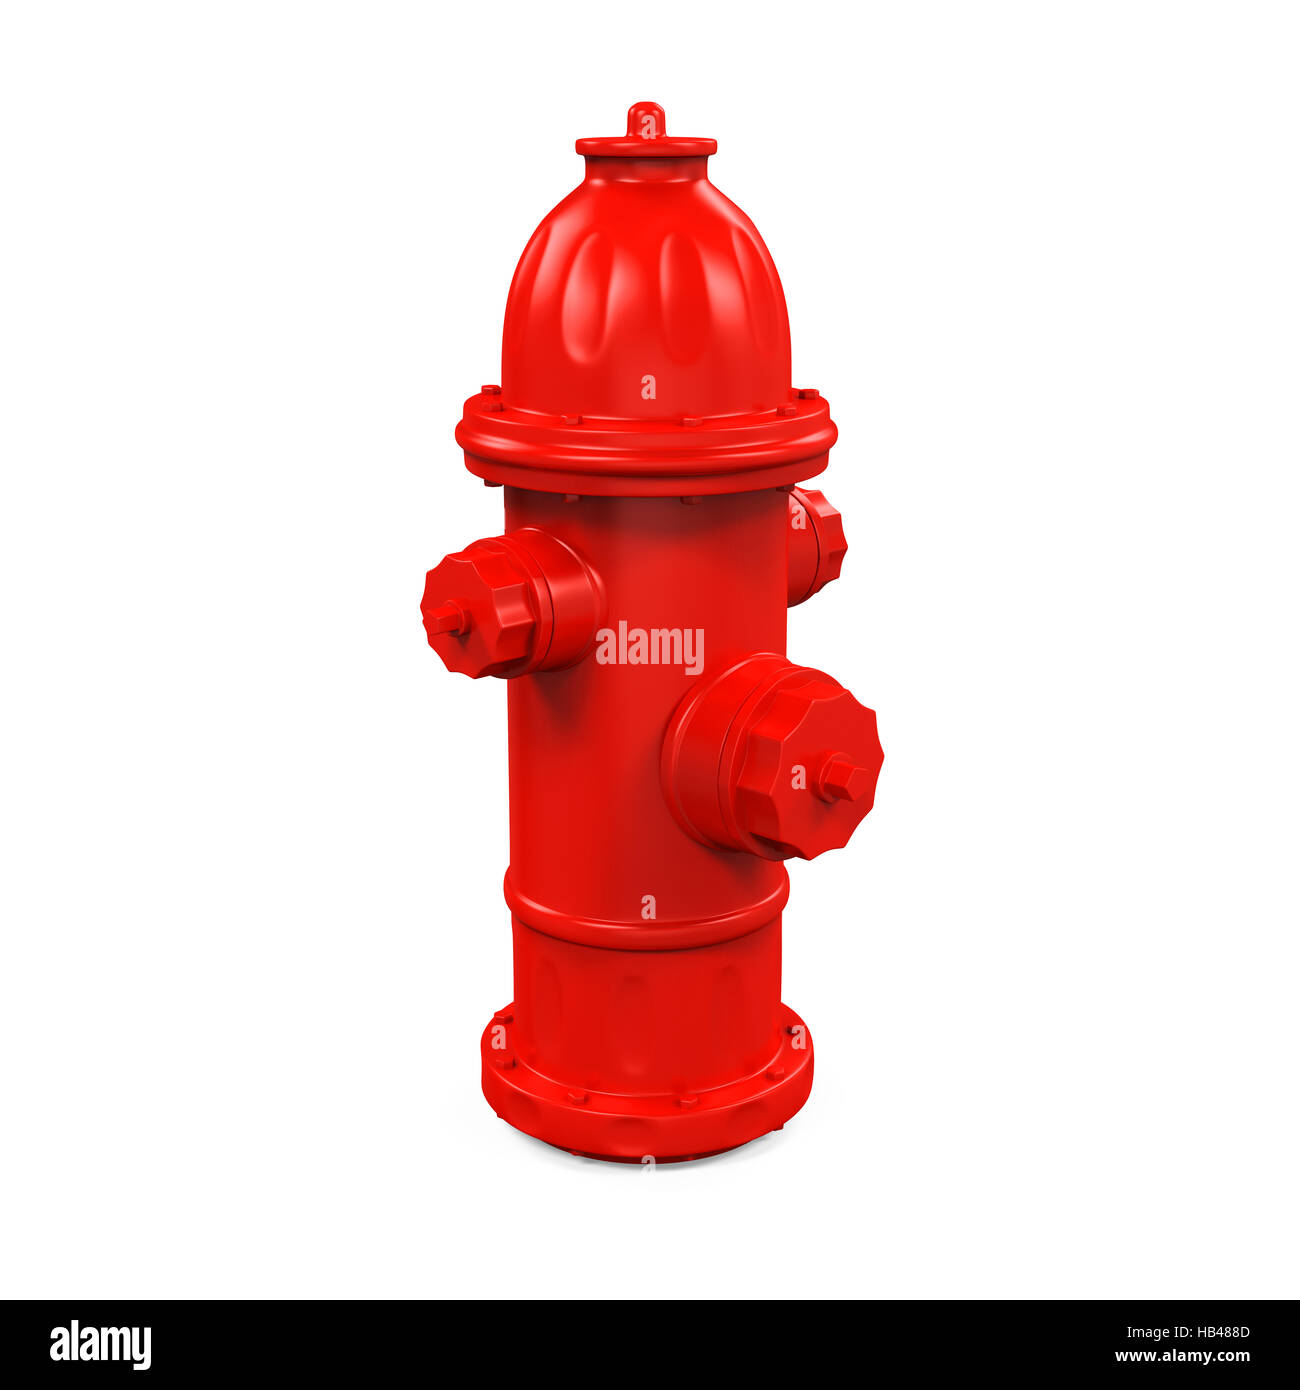 UK Seller Customised Fire Hydrant H Symbol Safety Sign 